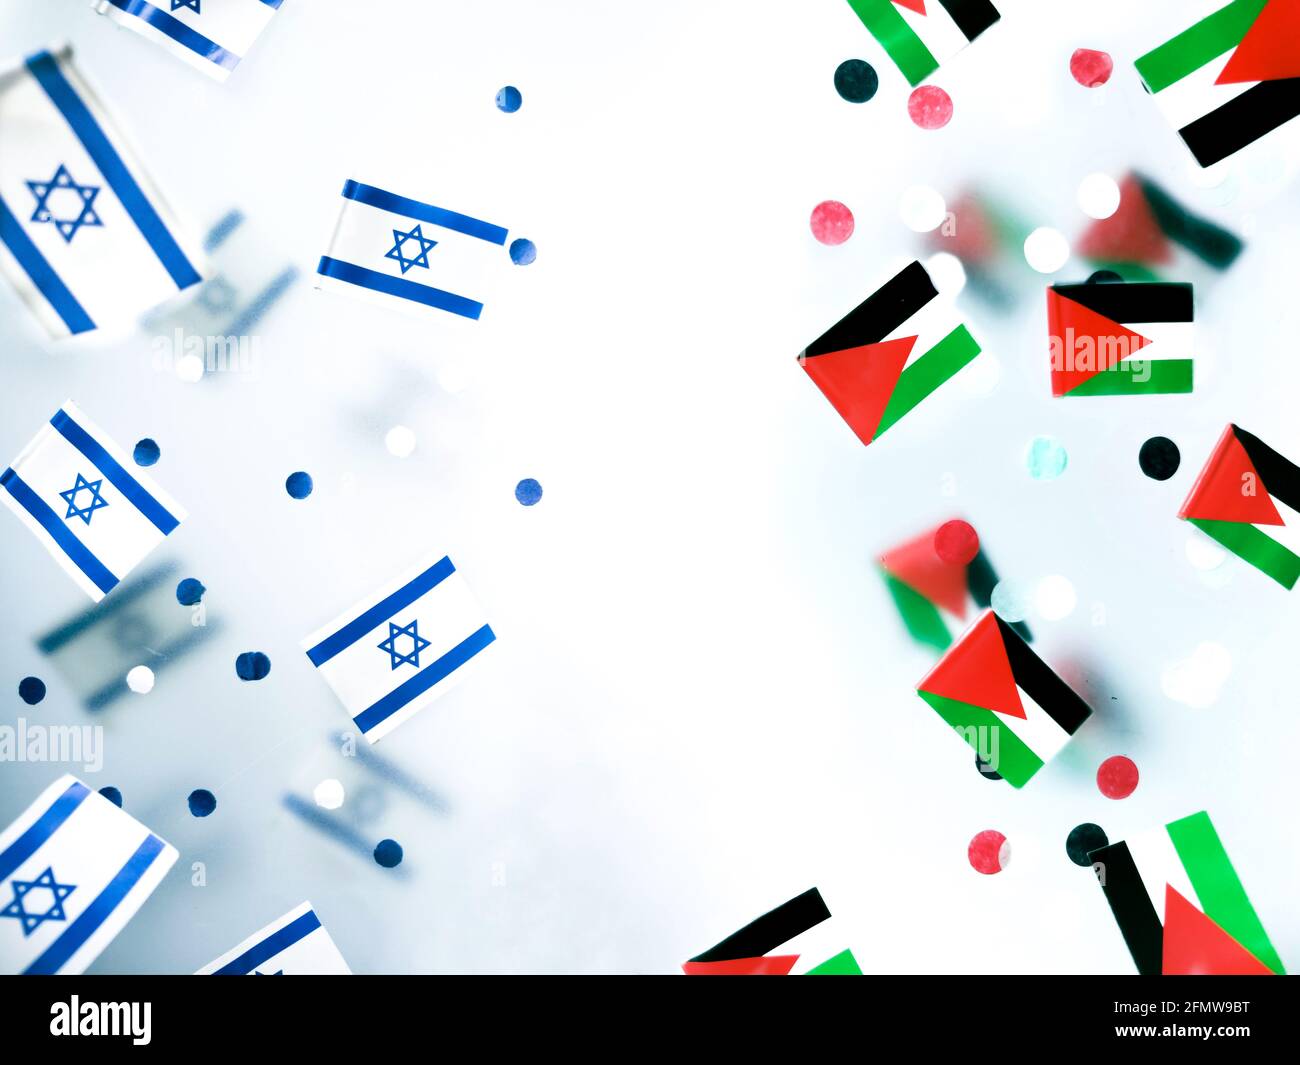 confrontation between Palestine and Israel. War and conflict. concept cooperation and independence. National flags on foggy background Stock Photo